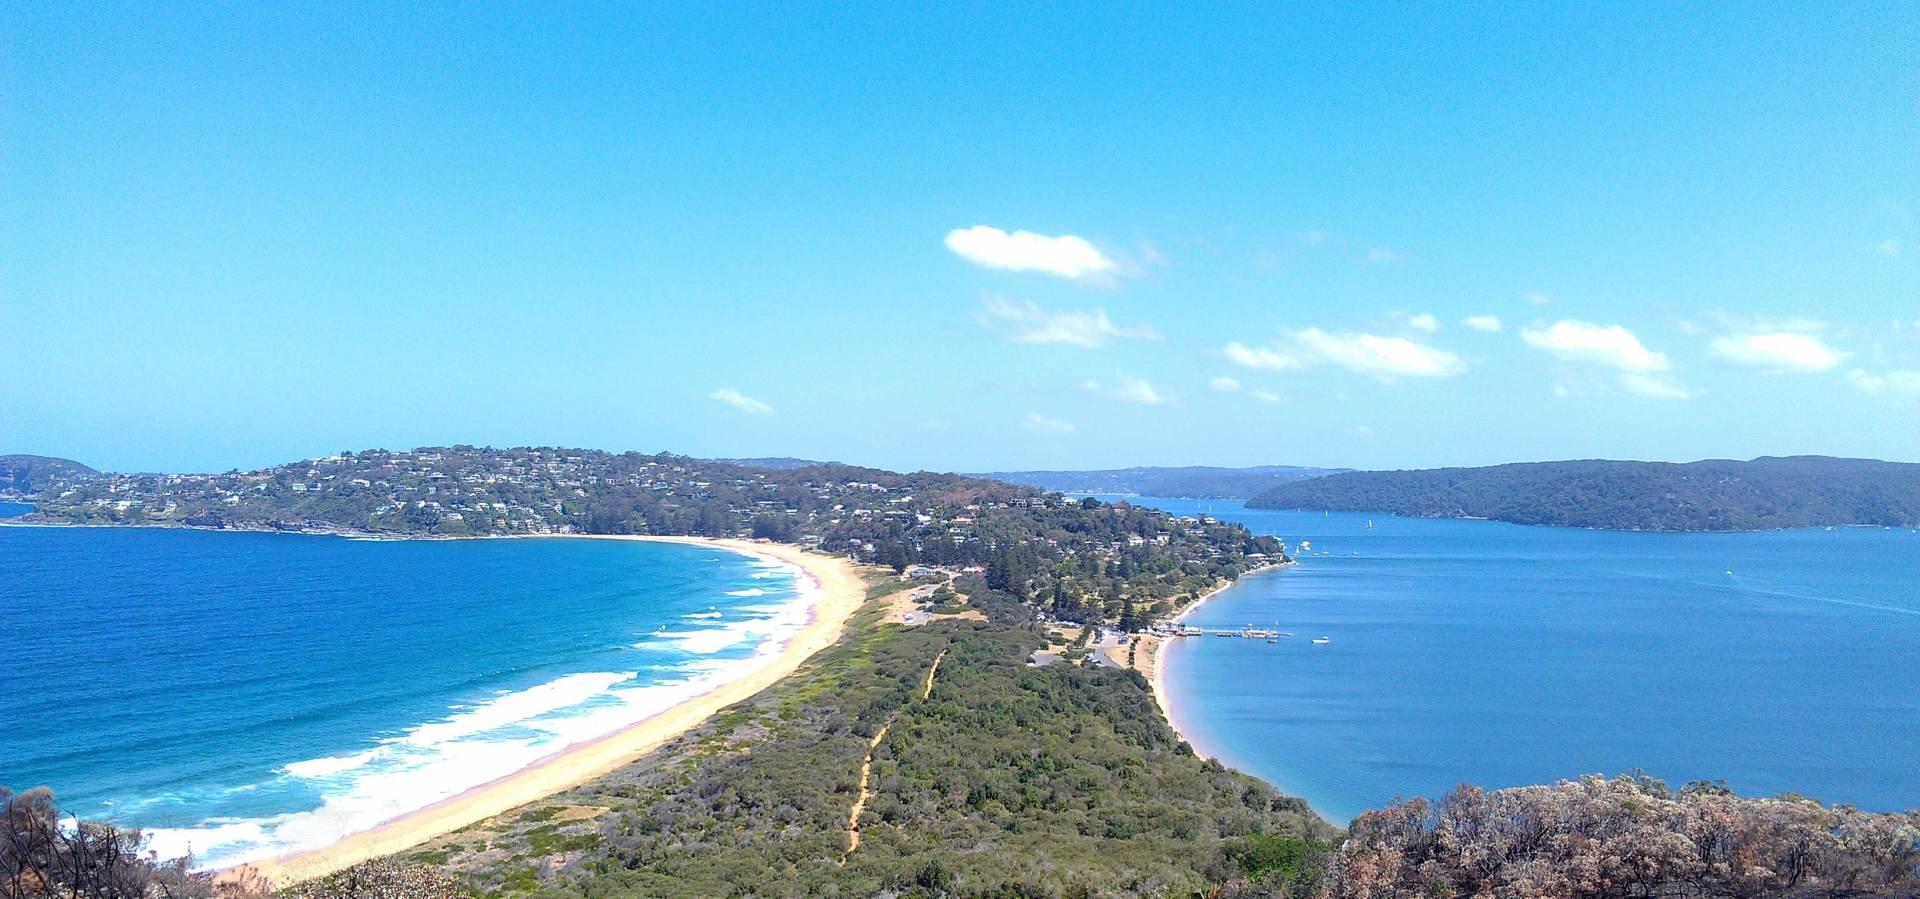 The view from Barrenjoey headland, the northern most point of Sydney's Great Coastal Walk